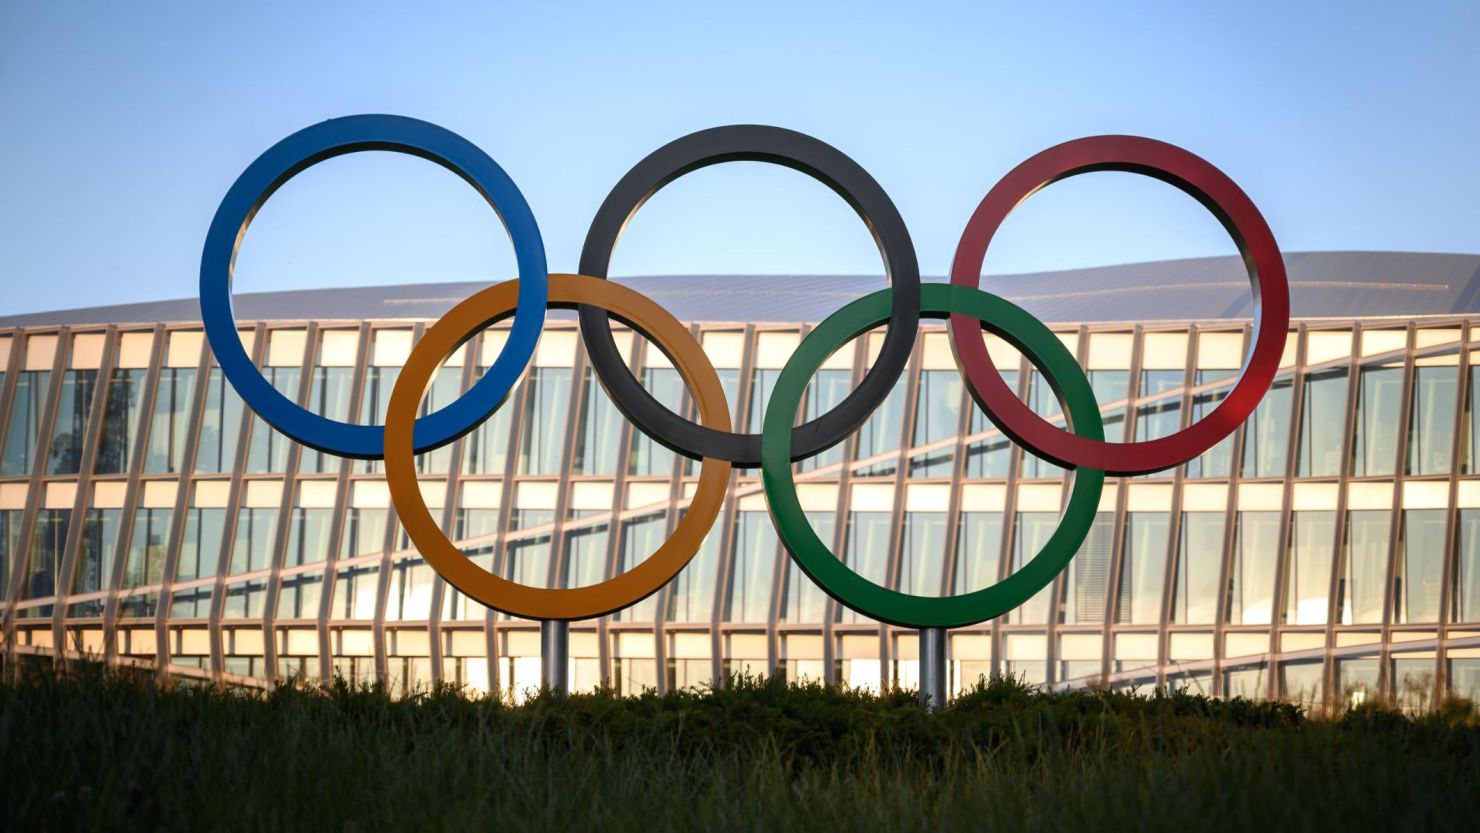 The Olympic Rings outside the International Olympic Committee (IOC) headquarters in Lausanne.